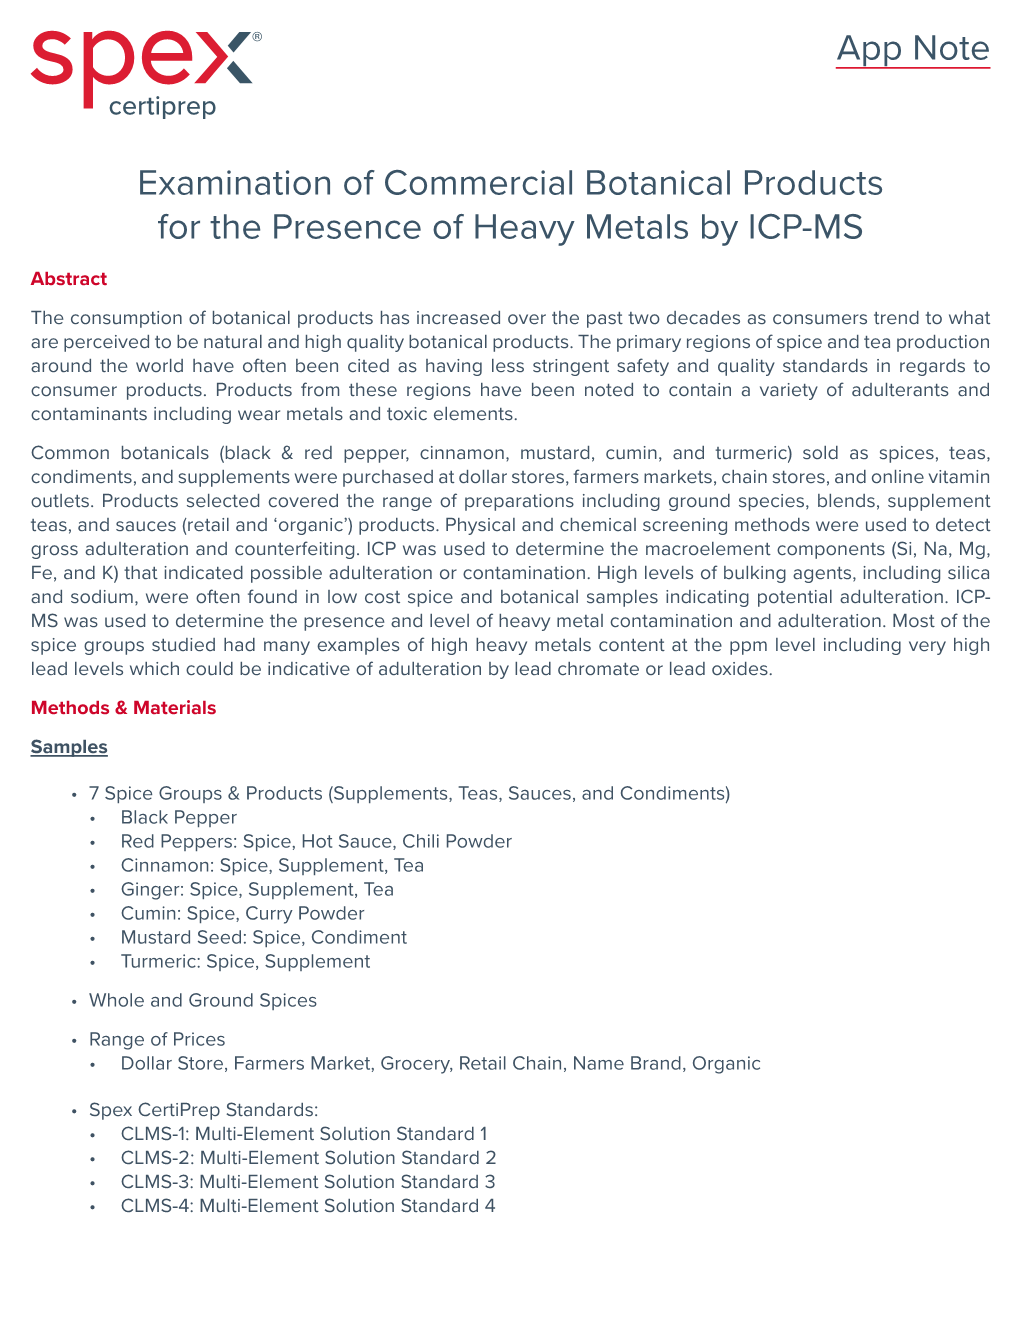 App Note Examination of Commercial Botanical Products for the Presence